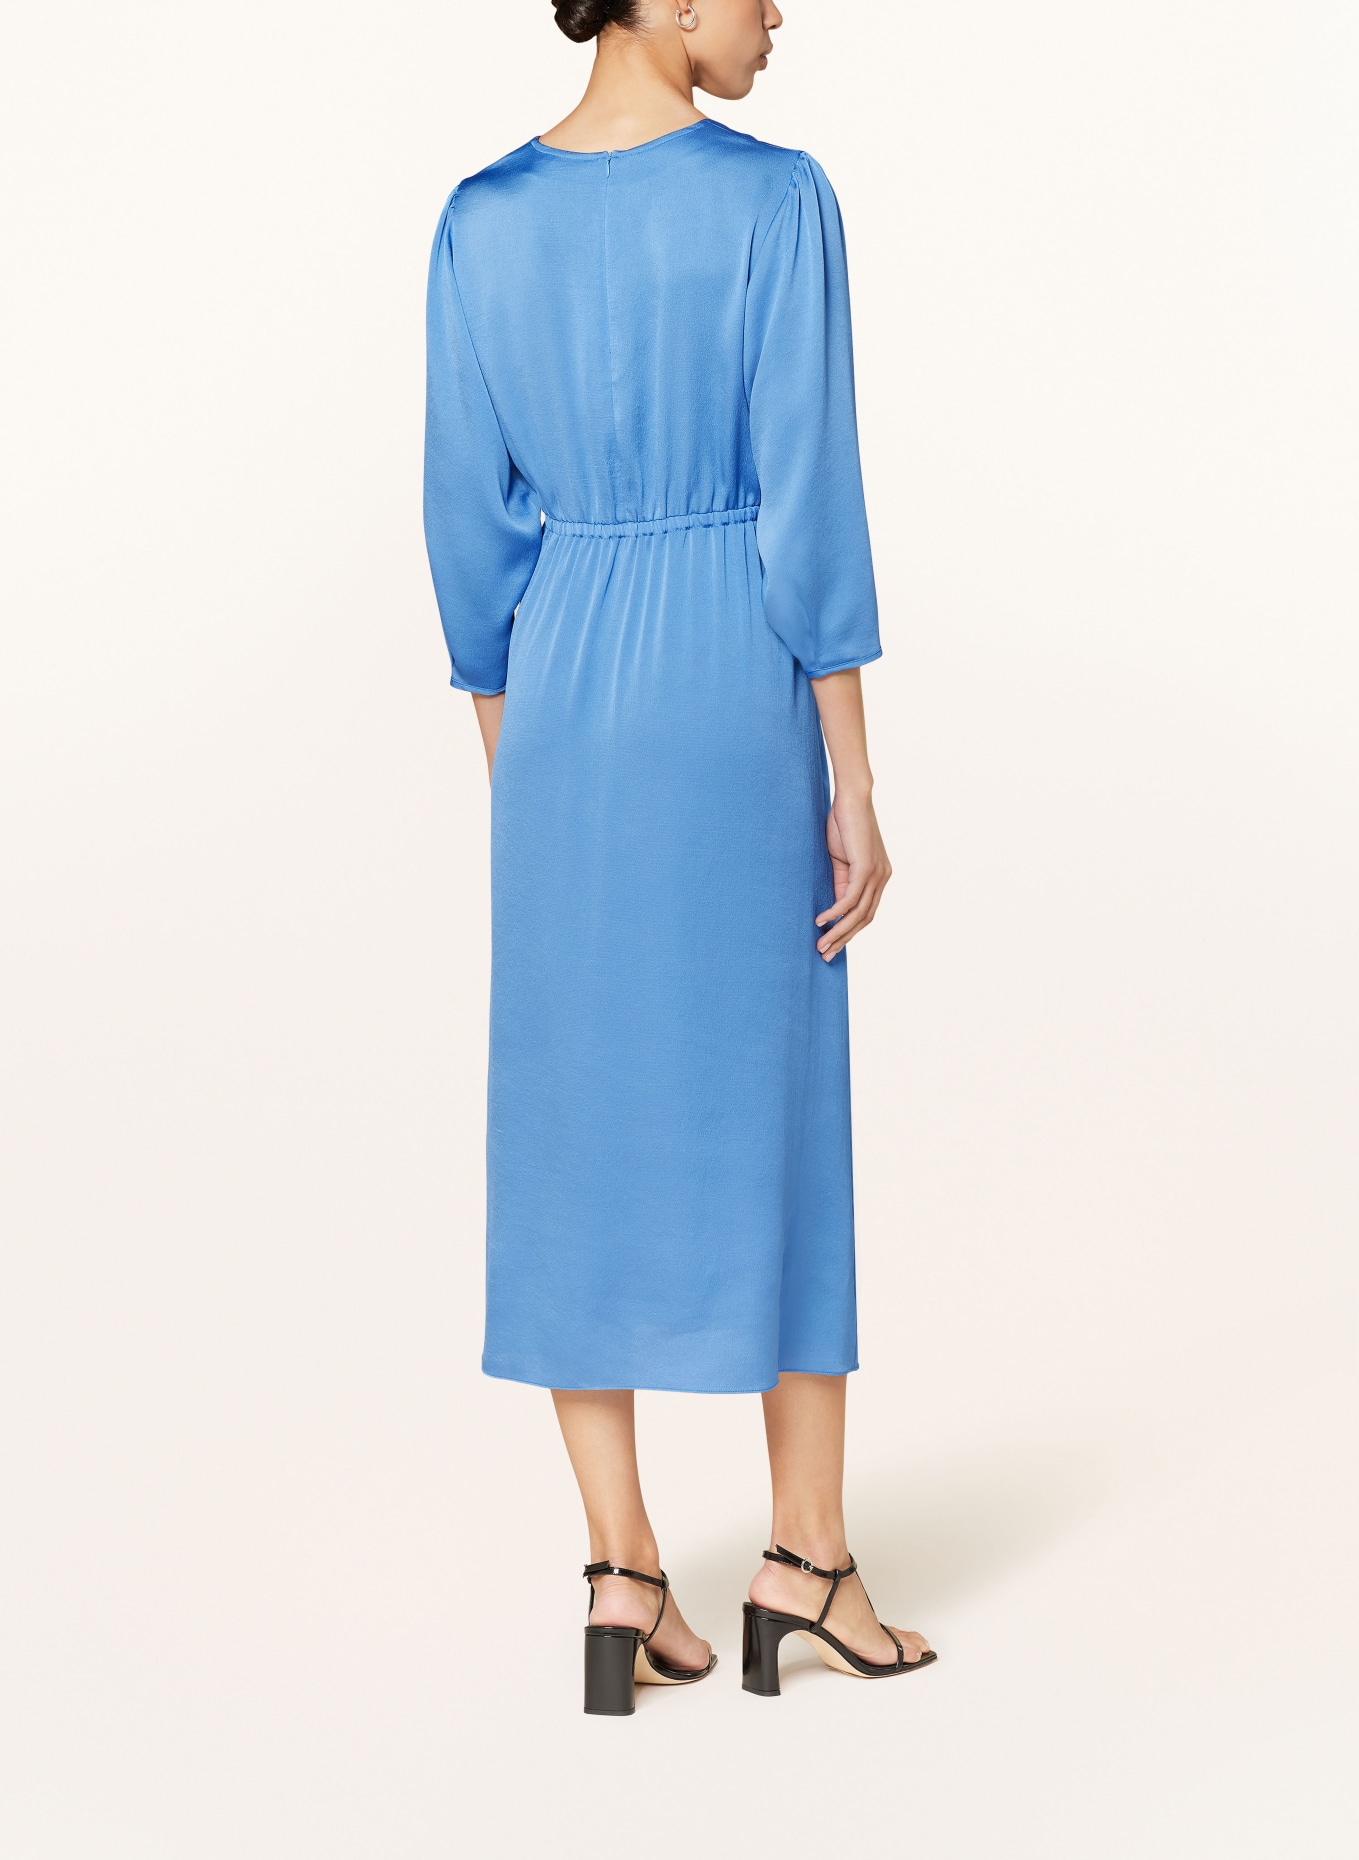 RIANI Satin dress with 3/4 sleeves, Color: LIGHT BLUE (Image 3)